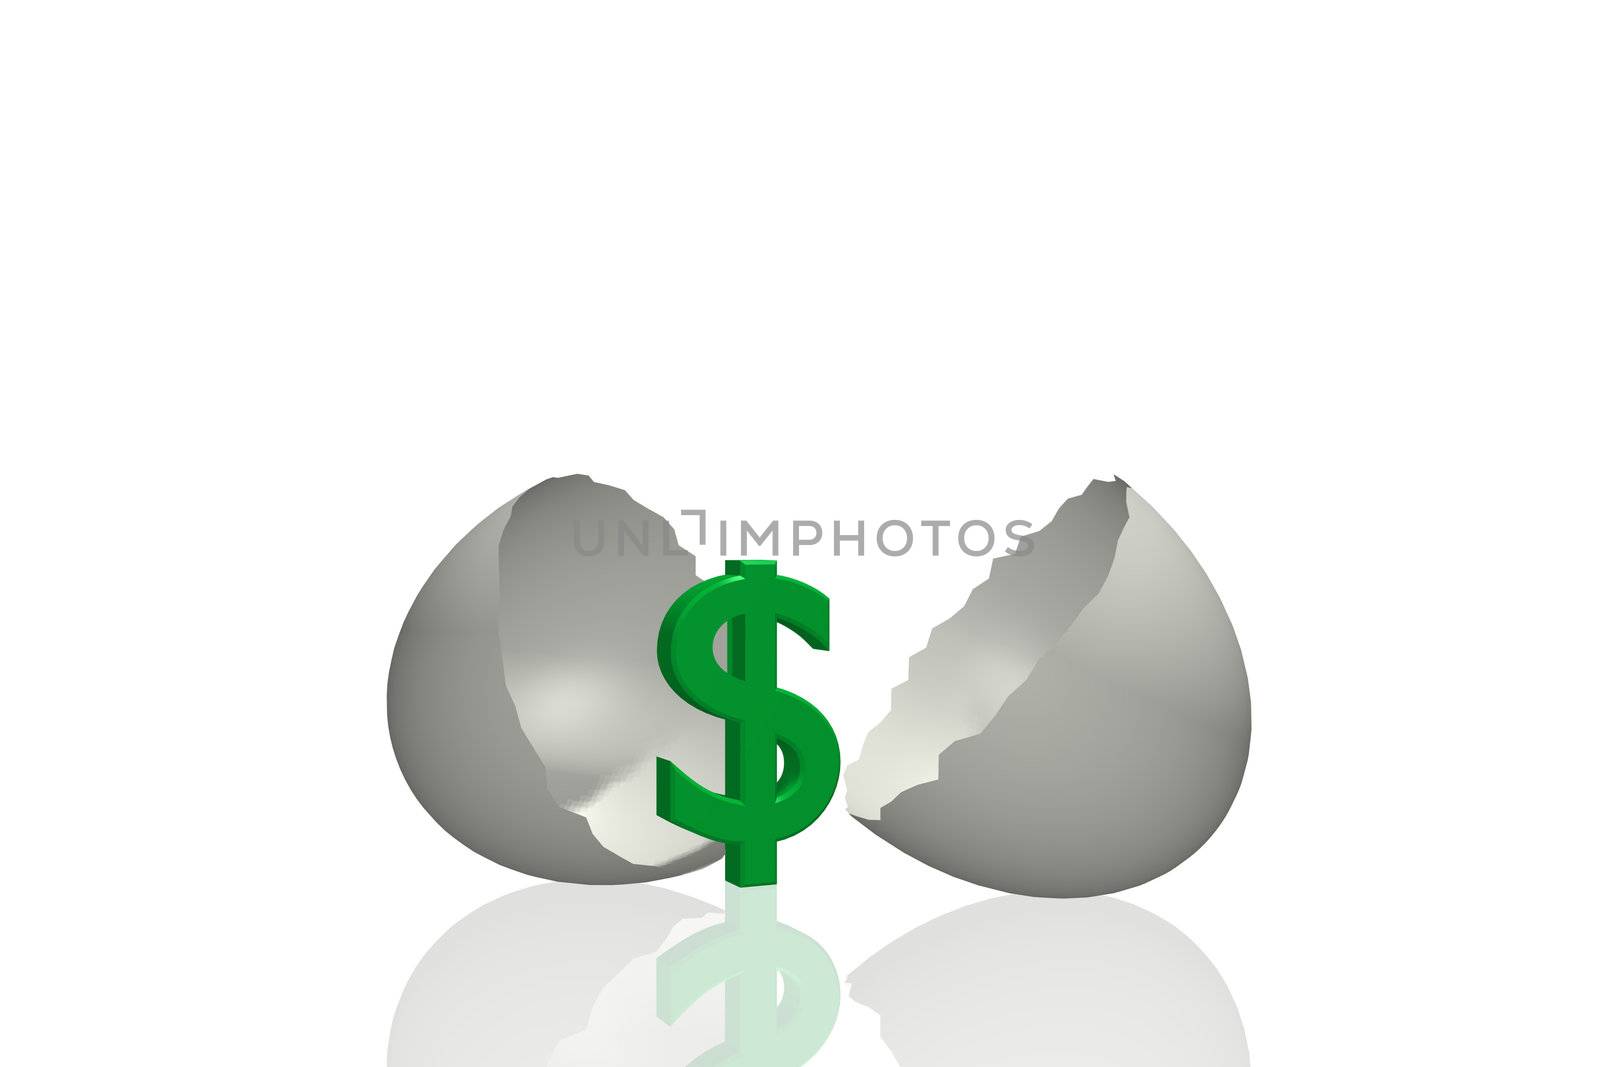 Concept image of a dollar sign being hatched from an egg isolated on a white background.